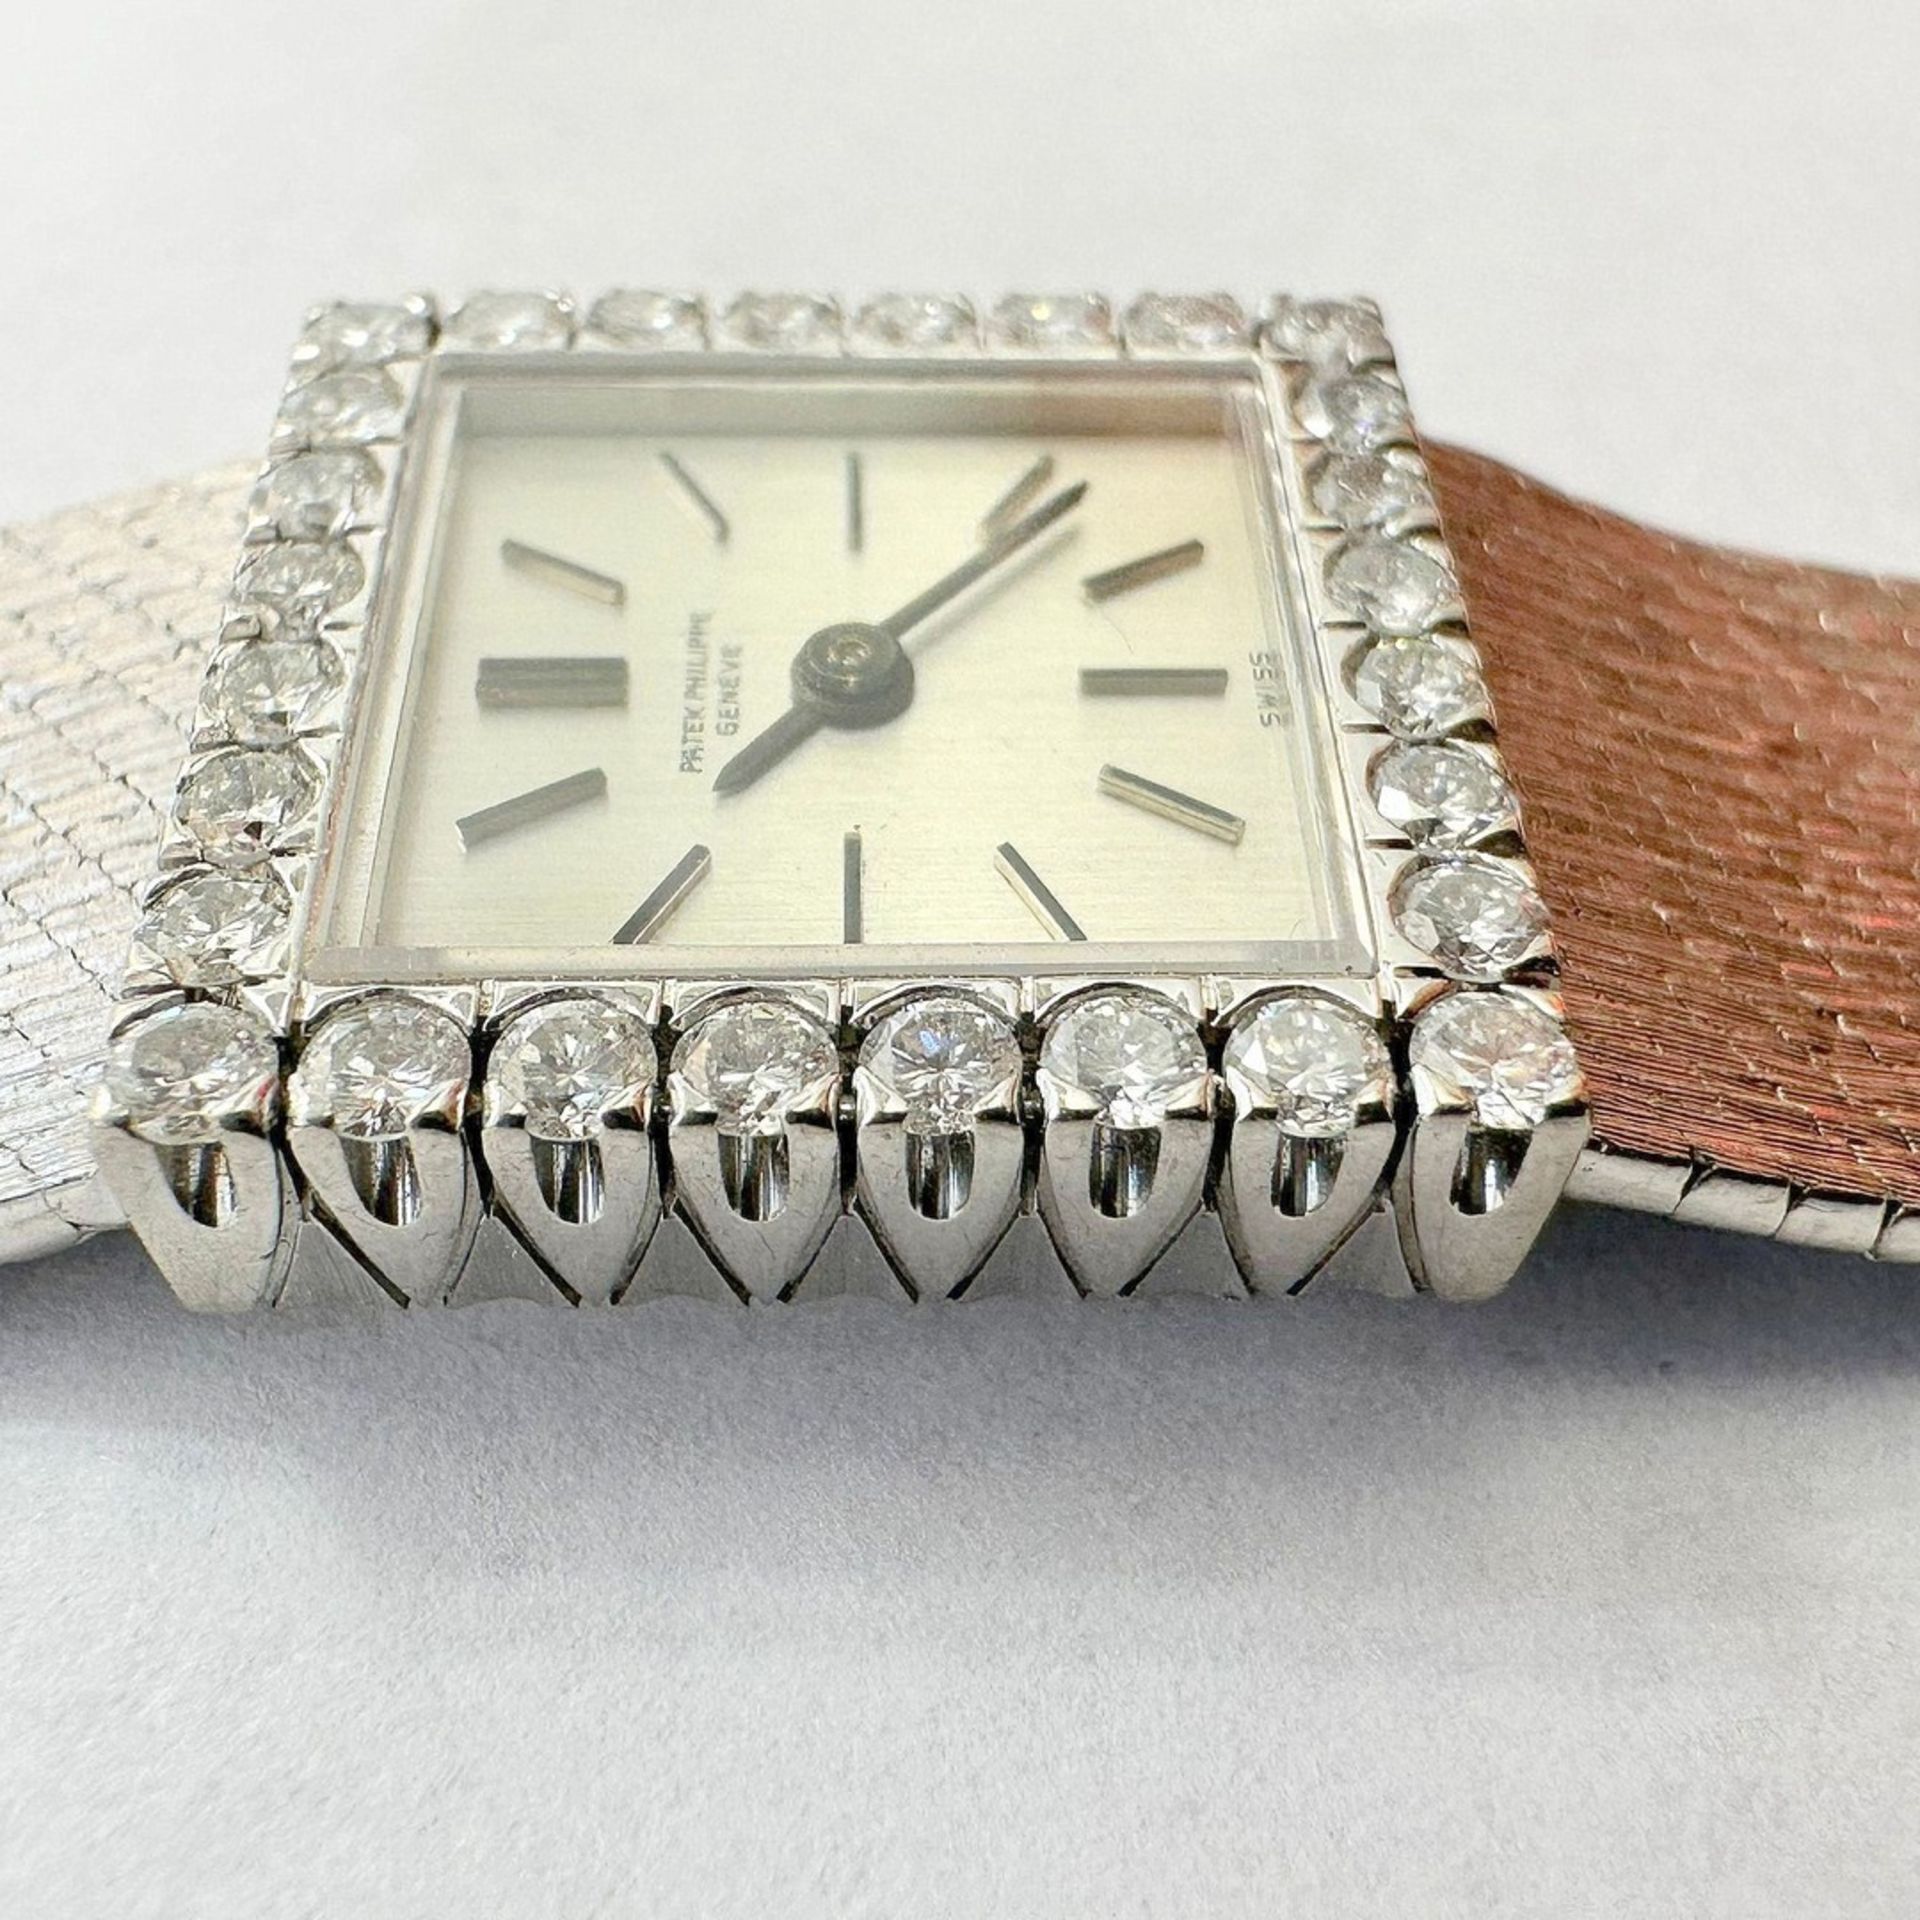 Patek Philippe / Cocktail Vintage 18K White Gold - Lady's White Gold Wristwatch - Image 5 of 14